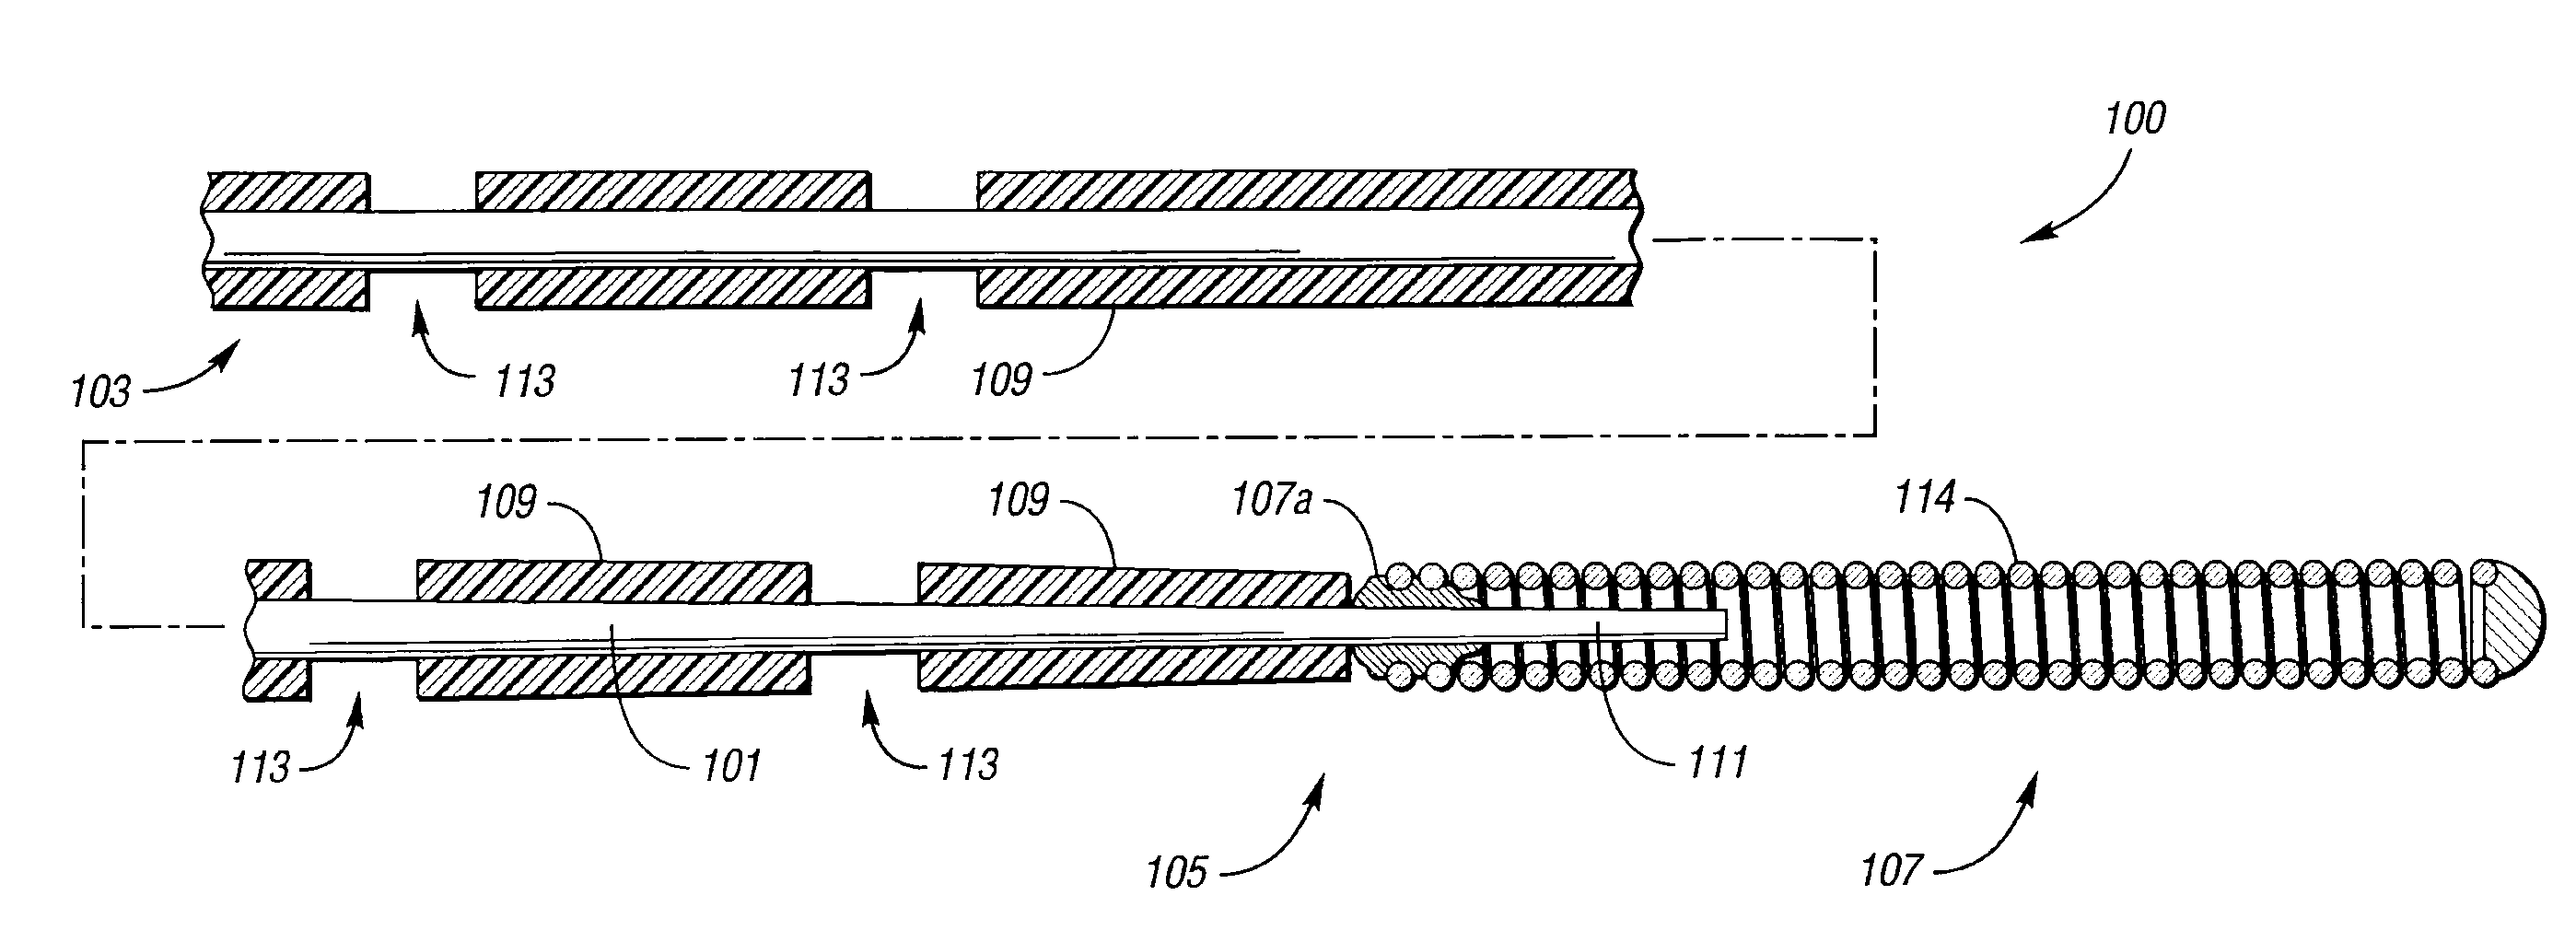 Low friction coated marked wire guide for over the wire insertion of a catheter